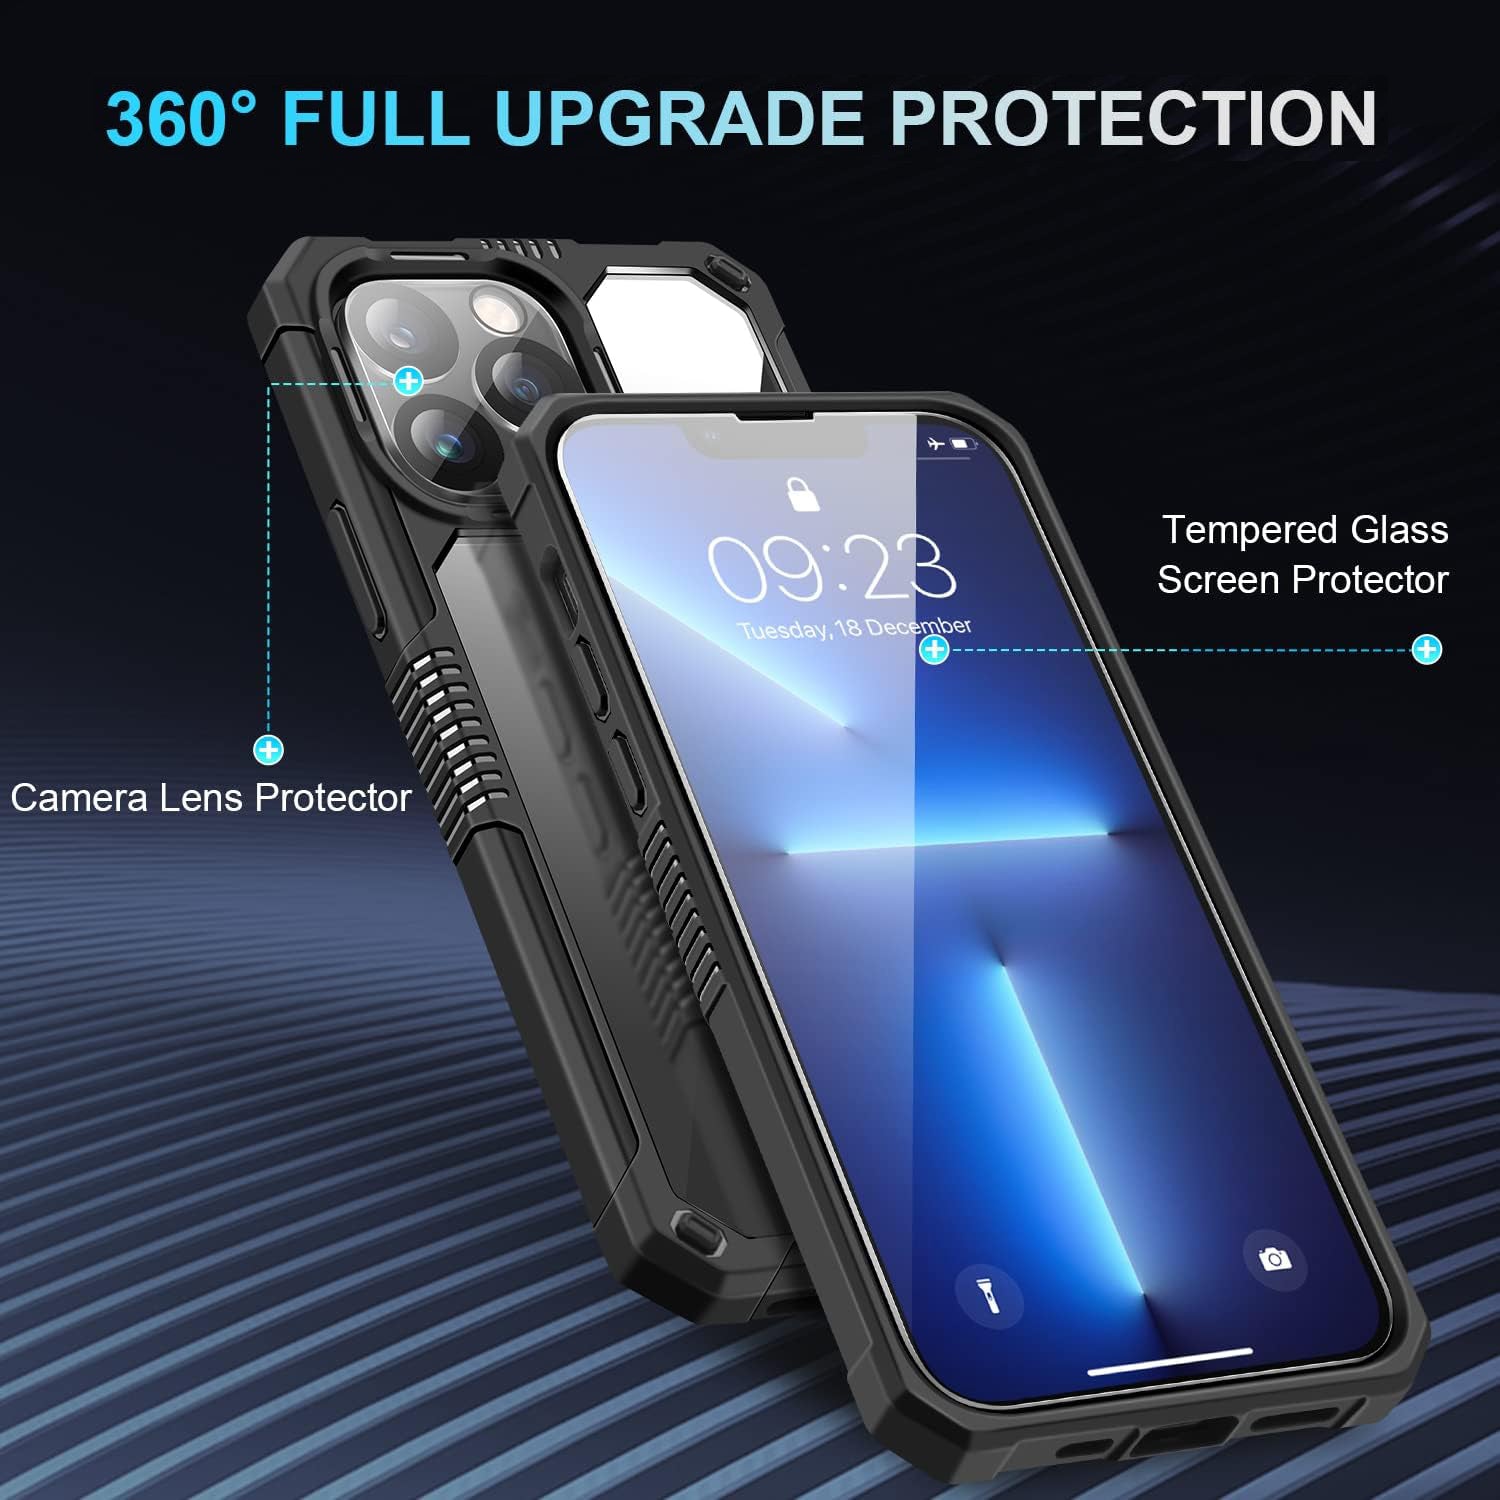 Military-Grade Ultra-Protective Transparent Back Case for iPhone